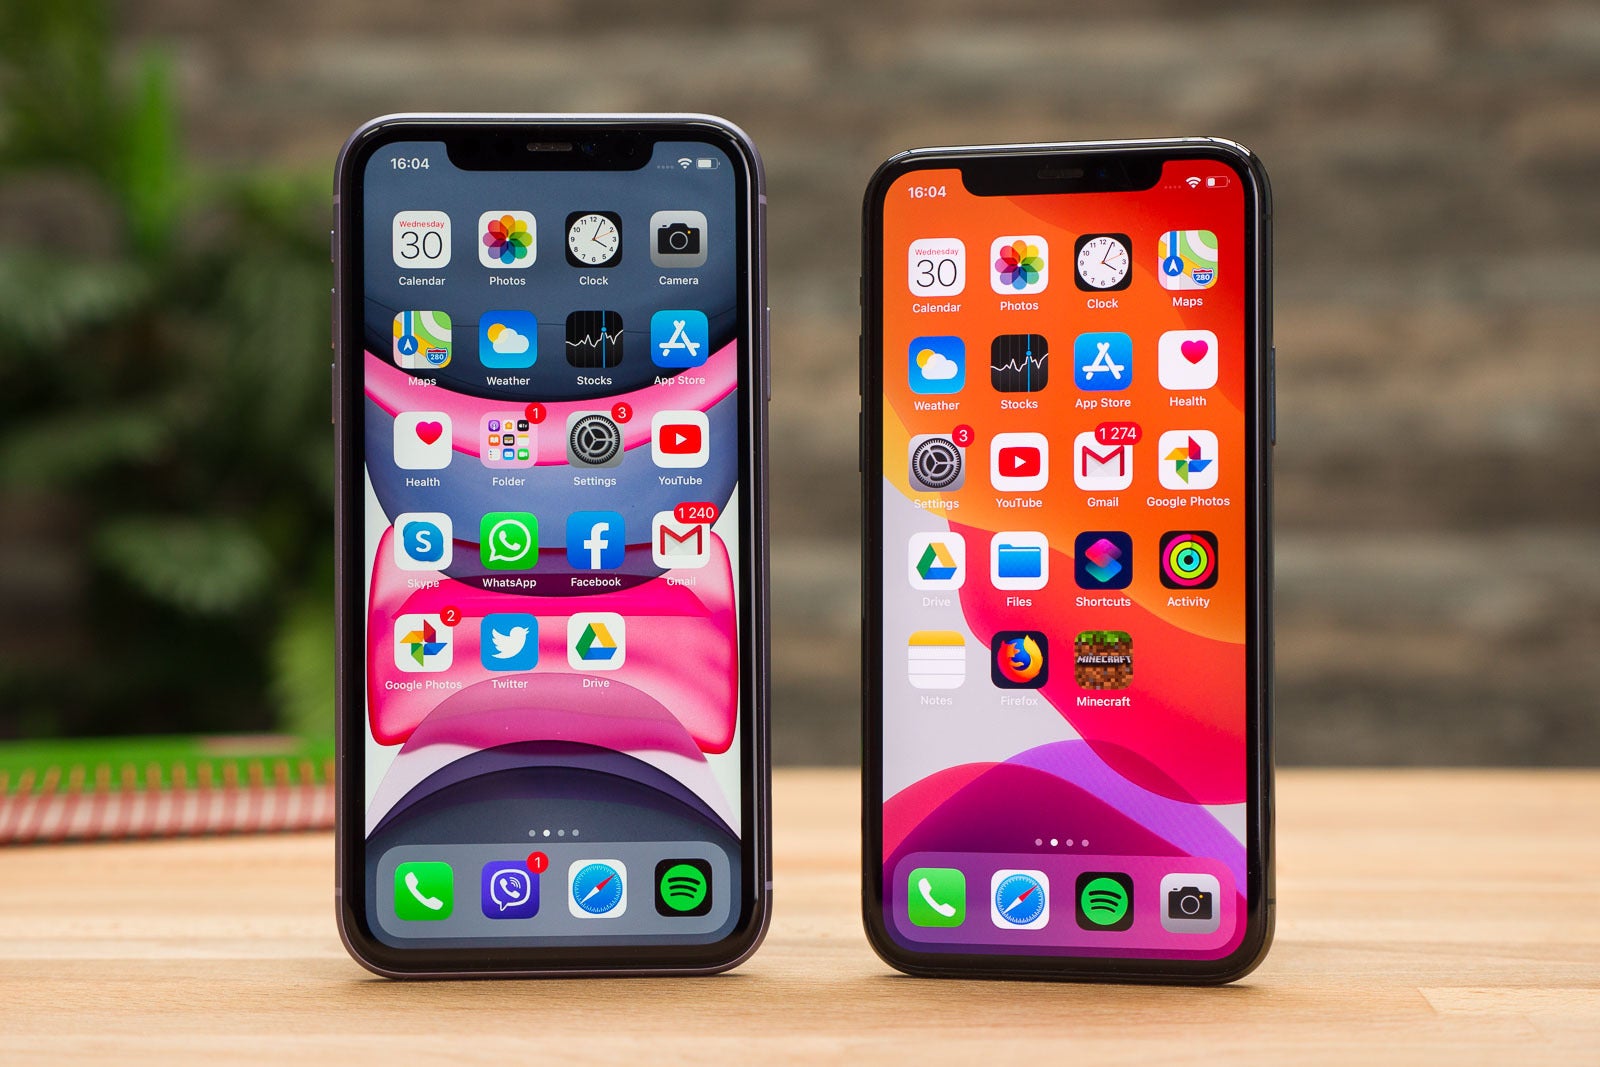 The iPhone 11 and iPhone 11 Pro - iPhone production resumes at key factory in China, but with only 10% of workforce